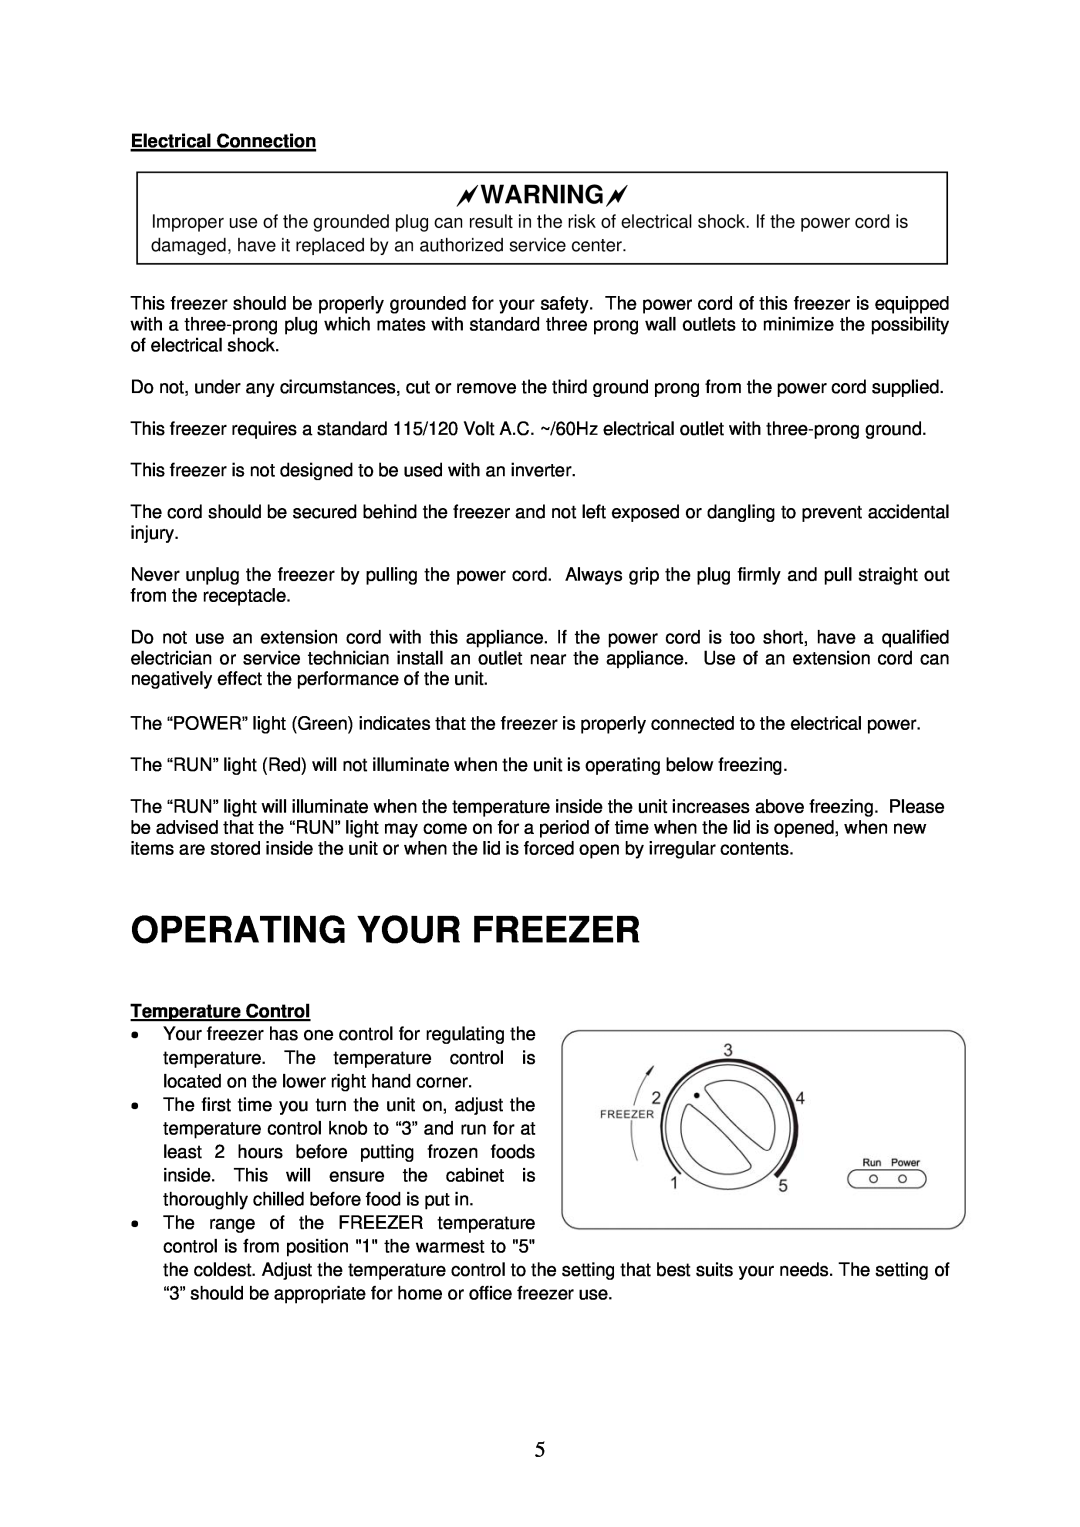 Crosley CCF54, CCF35, CCF73 instruction manual Operating Your Freezer, Warning, Electrical Connection, Temperature Control 